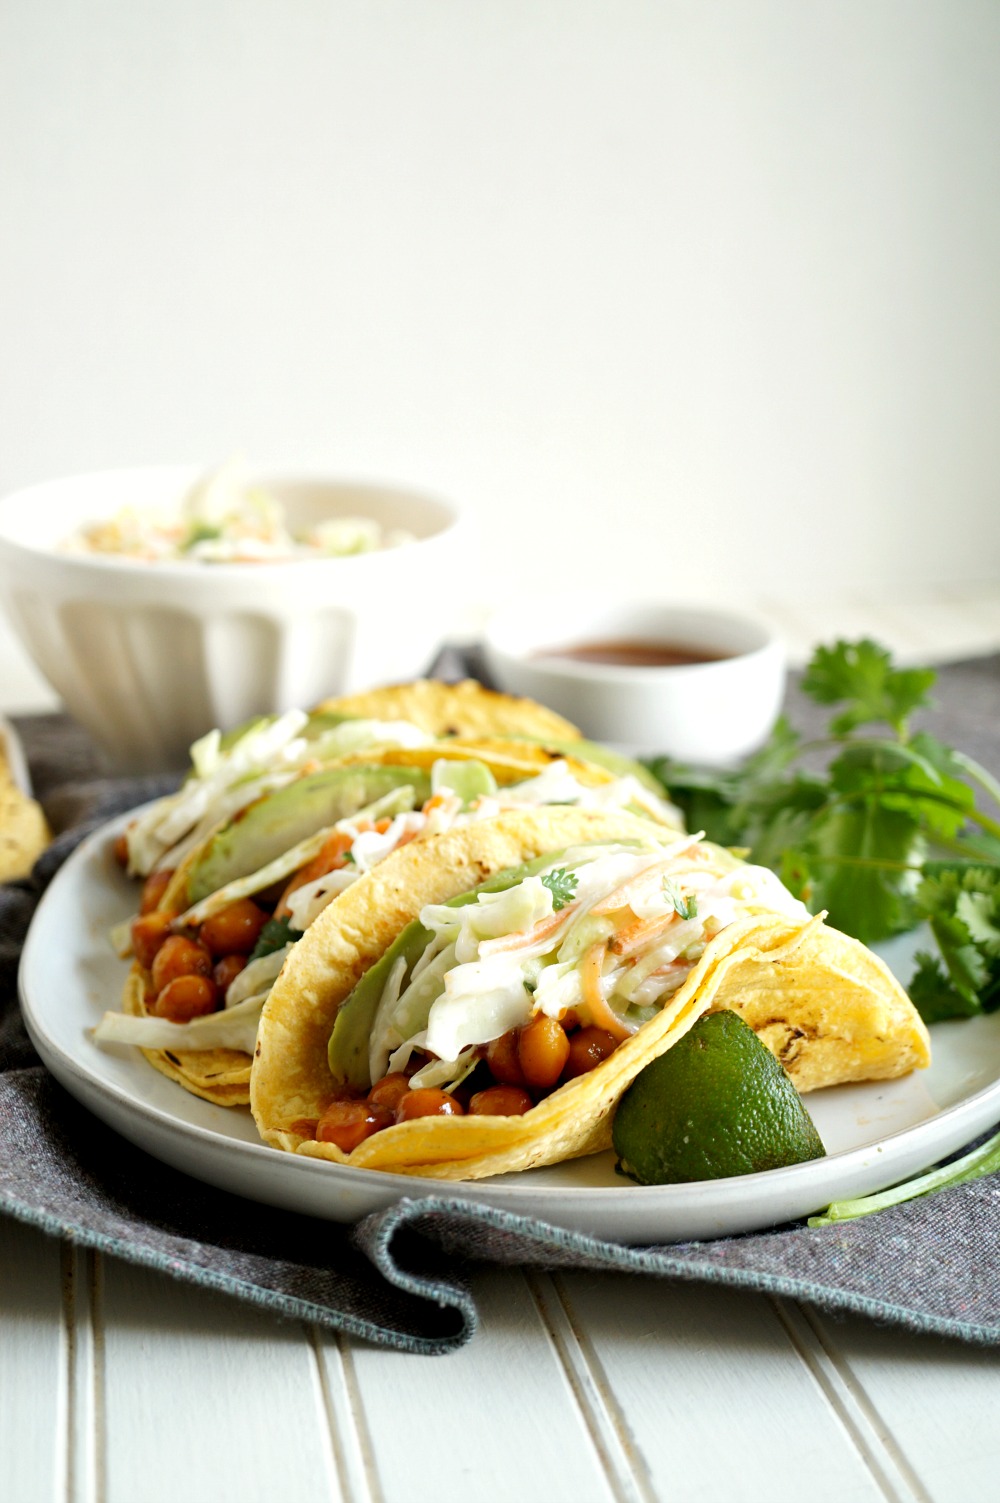 BBQ chickpea tacos topped with coleslaw and avocado on a plate